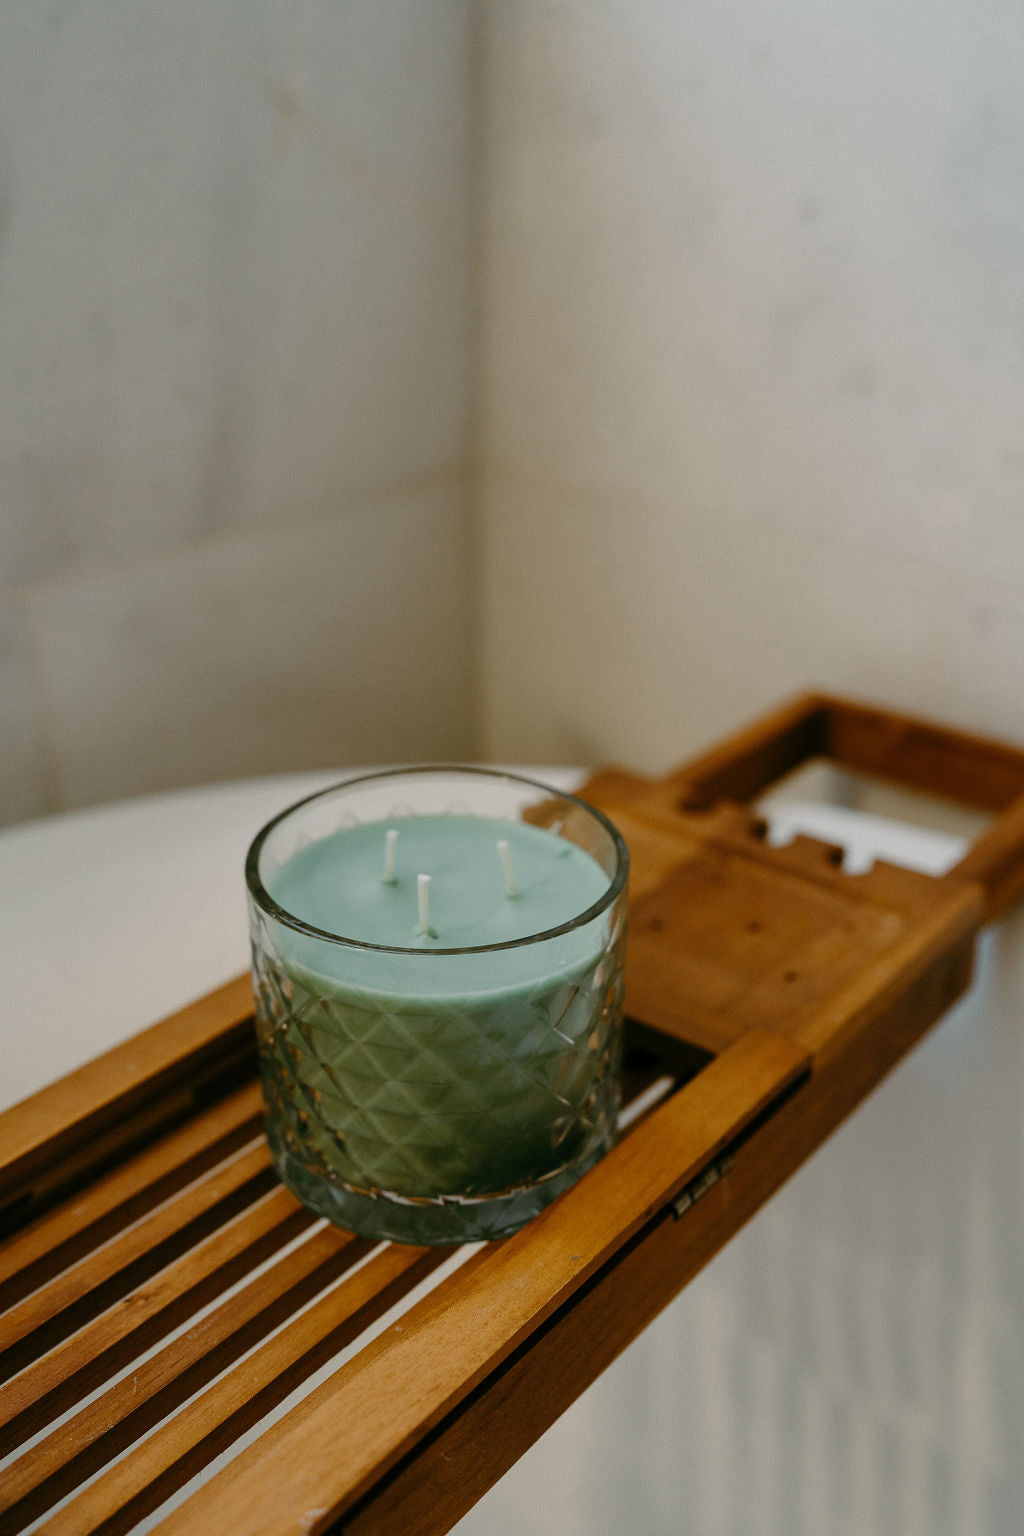 Benefits of Scented Candles on Mental Health